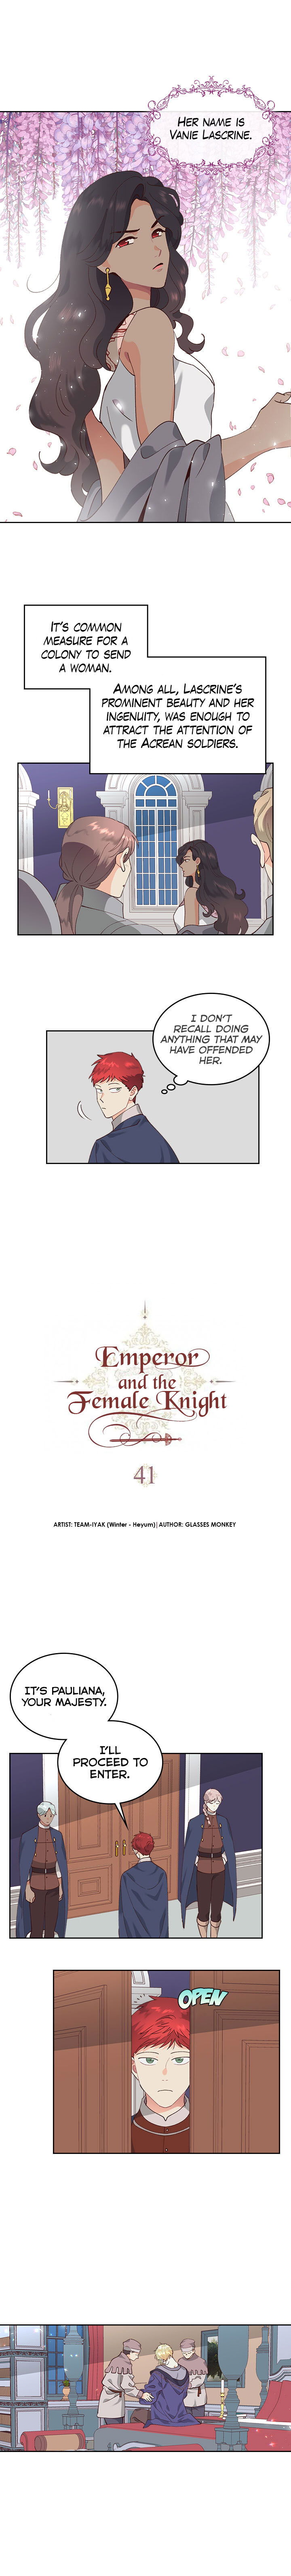 Emperor And The Female Knight Chapter 041 page 2